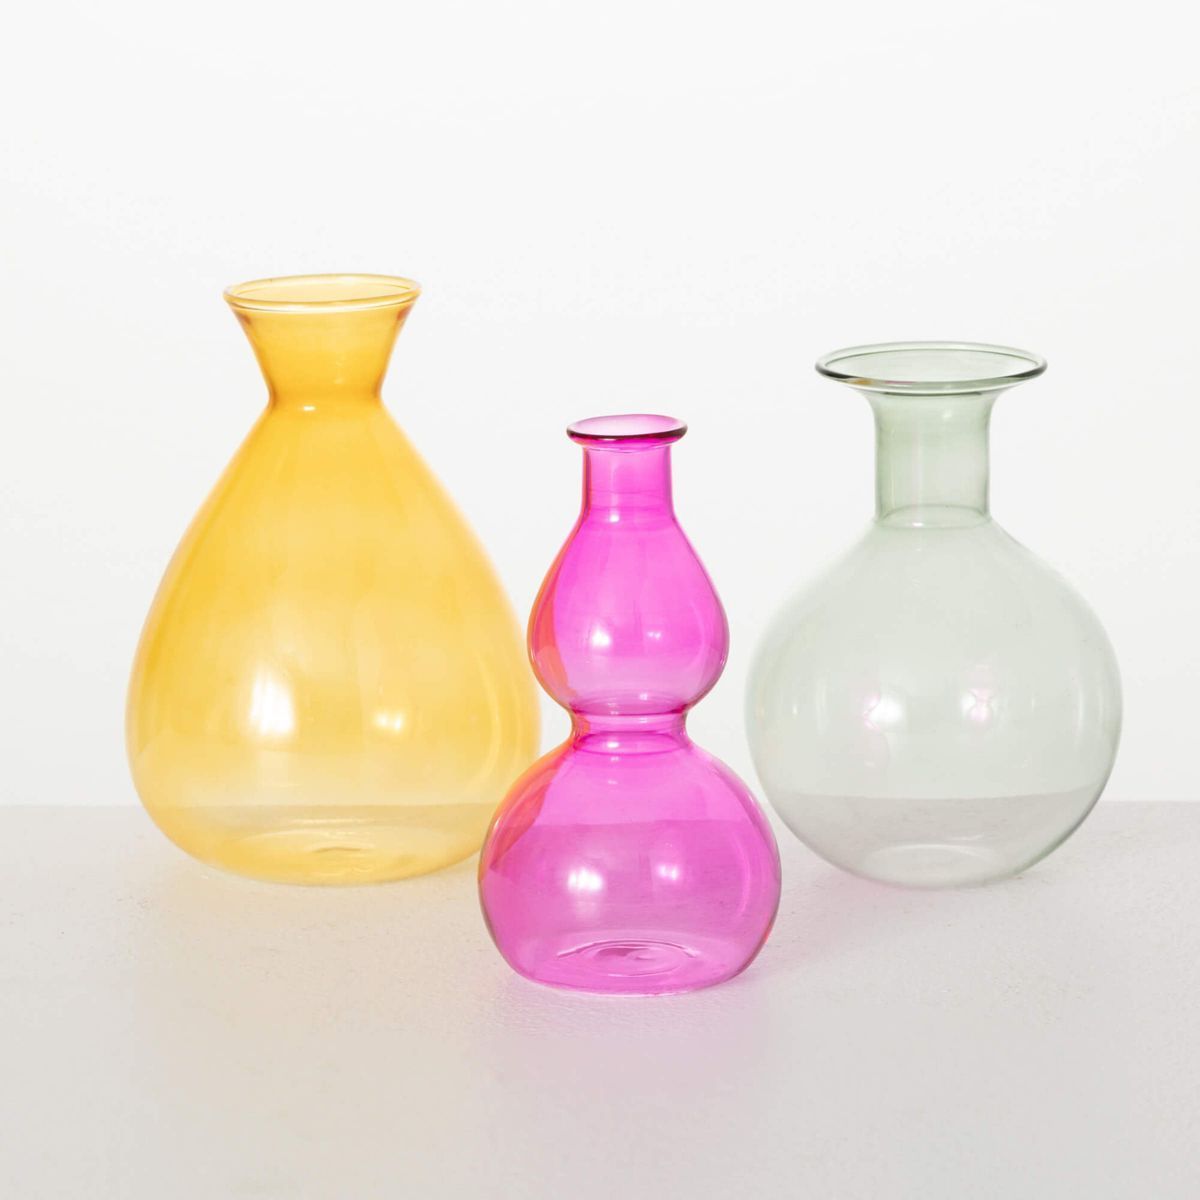 Sullivans Colorful Glass Vase Set of 3, 4.5"Tall, Multicolored | Target